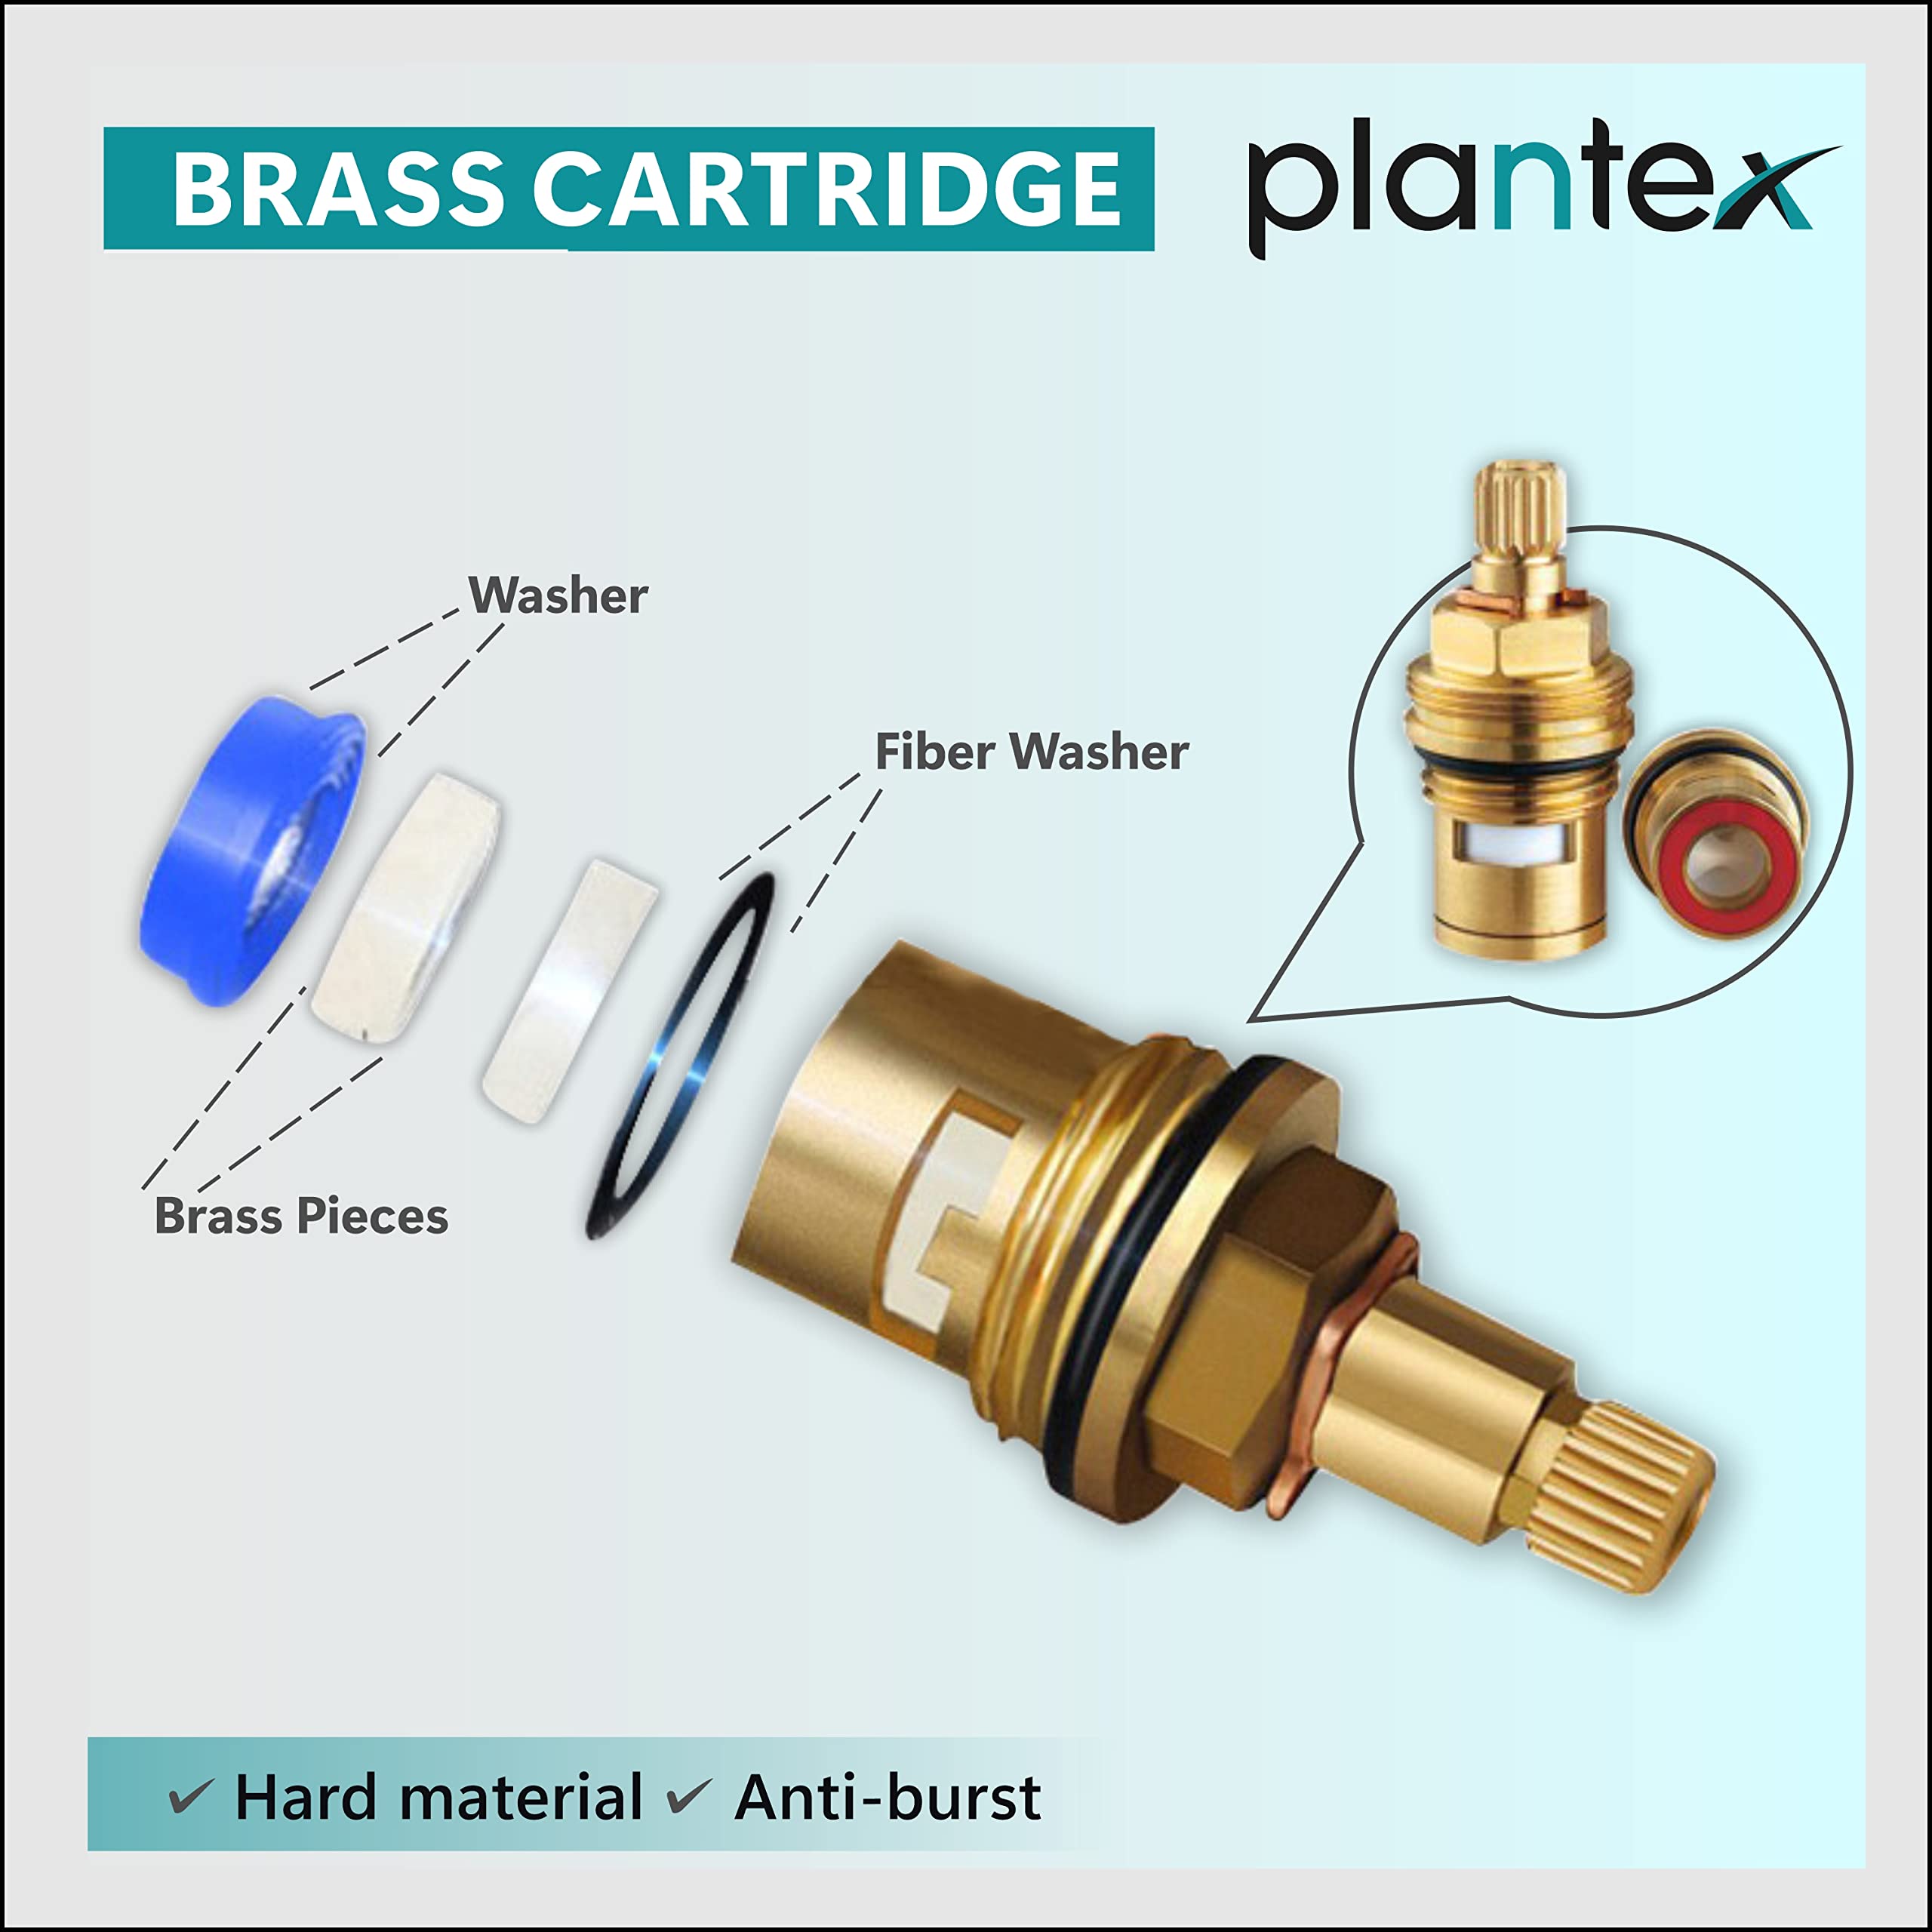 Plantex Pure Brass BAL-519 3 in 1 Wall Mixer with Bend for Arrangement of Overhead and Telephonic Shower for Bathroom with Brass Wall Flange & Teflon Tape (Mirror-Chrome Finish)